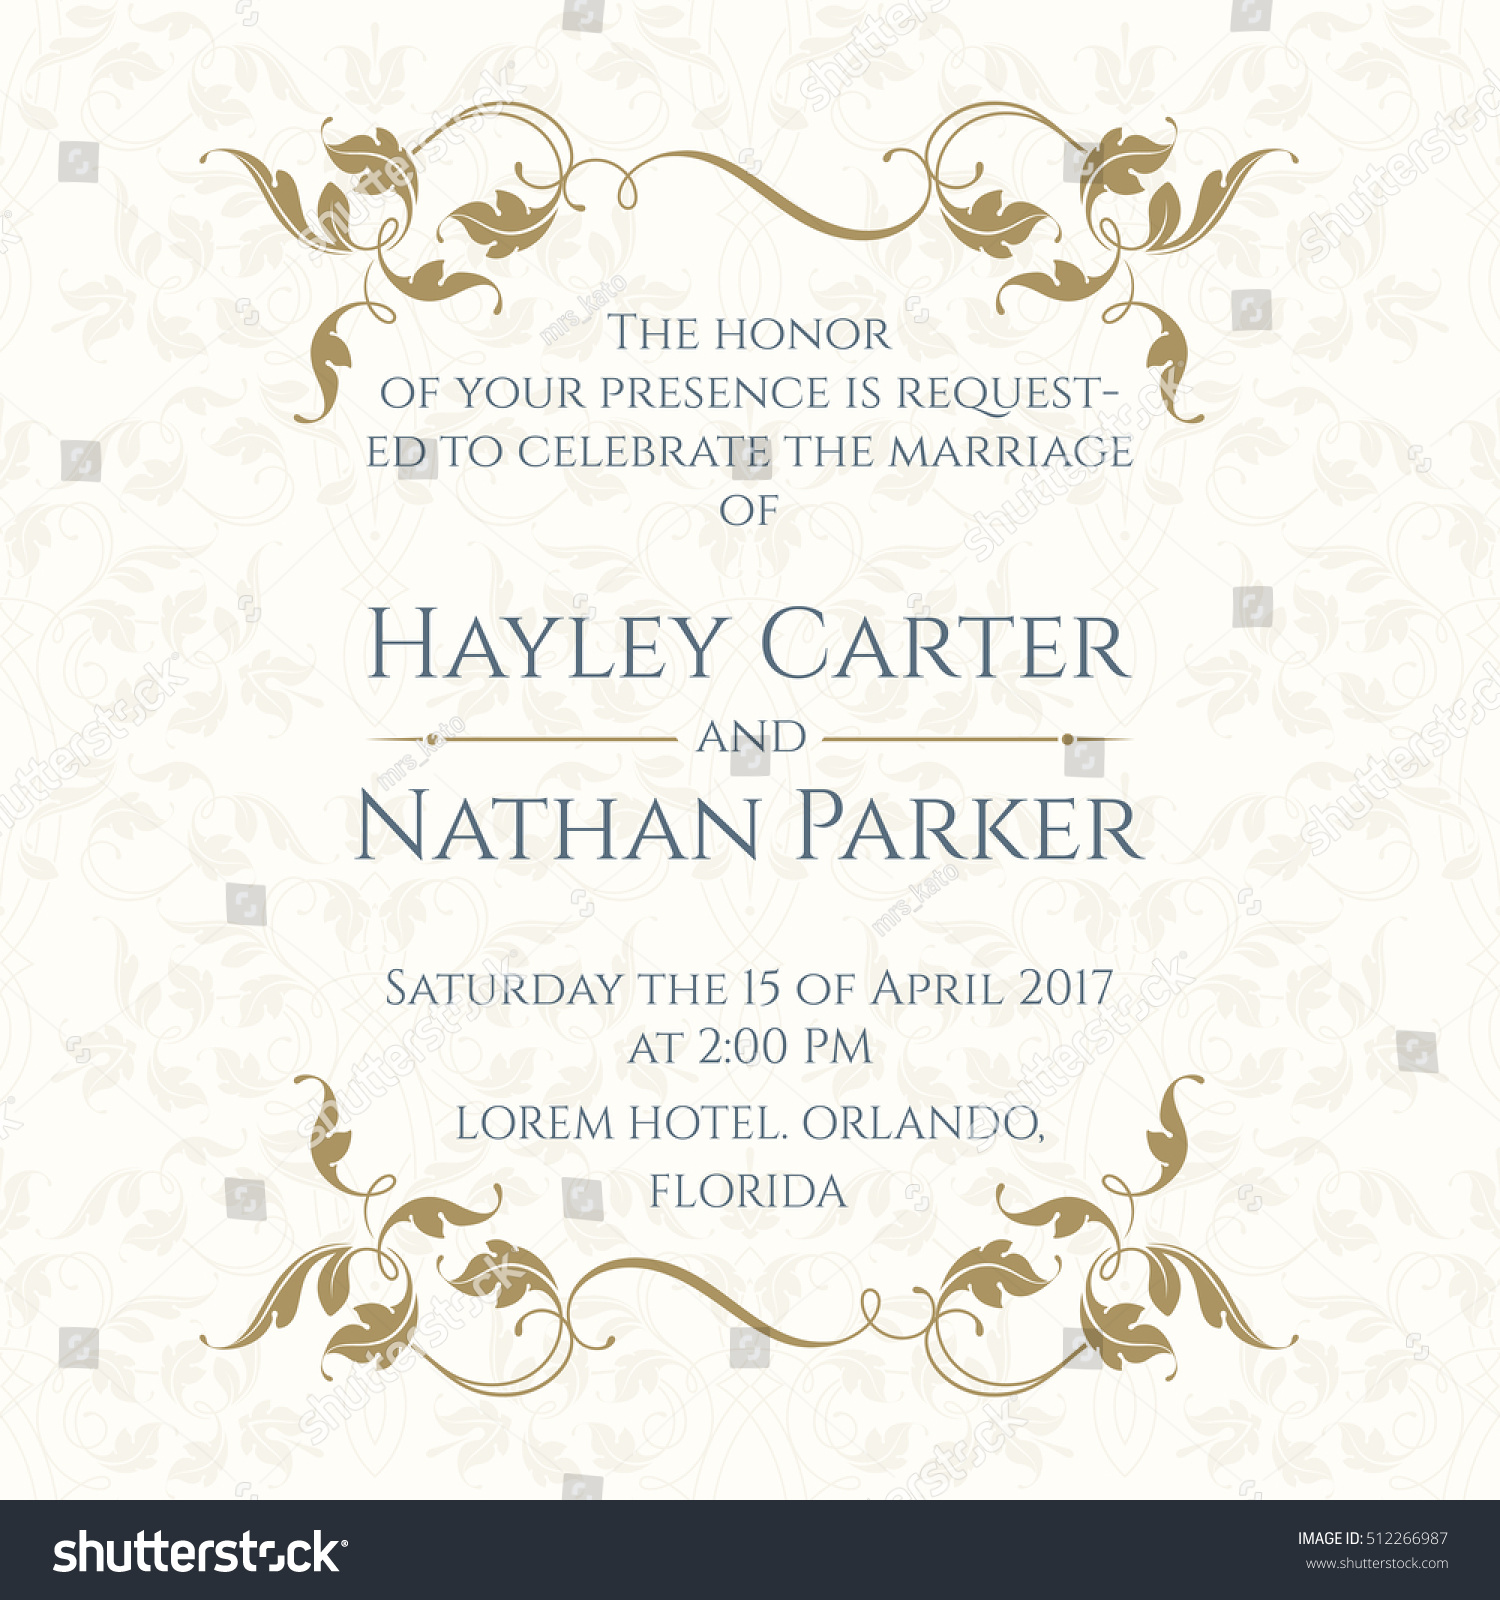 Invitation Card Floral Borders On Seamless Stock Vector (Royalty Free